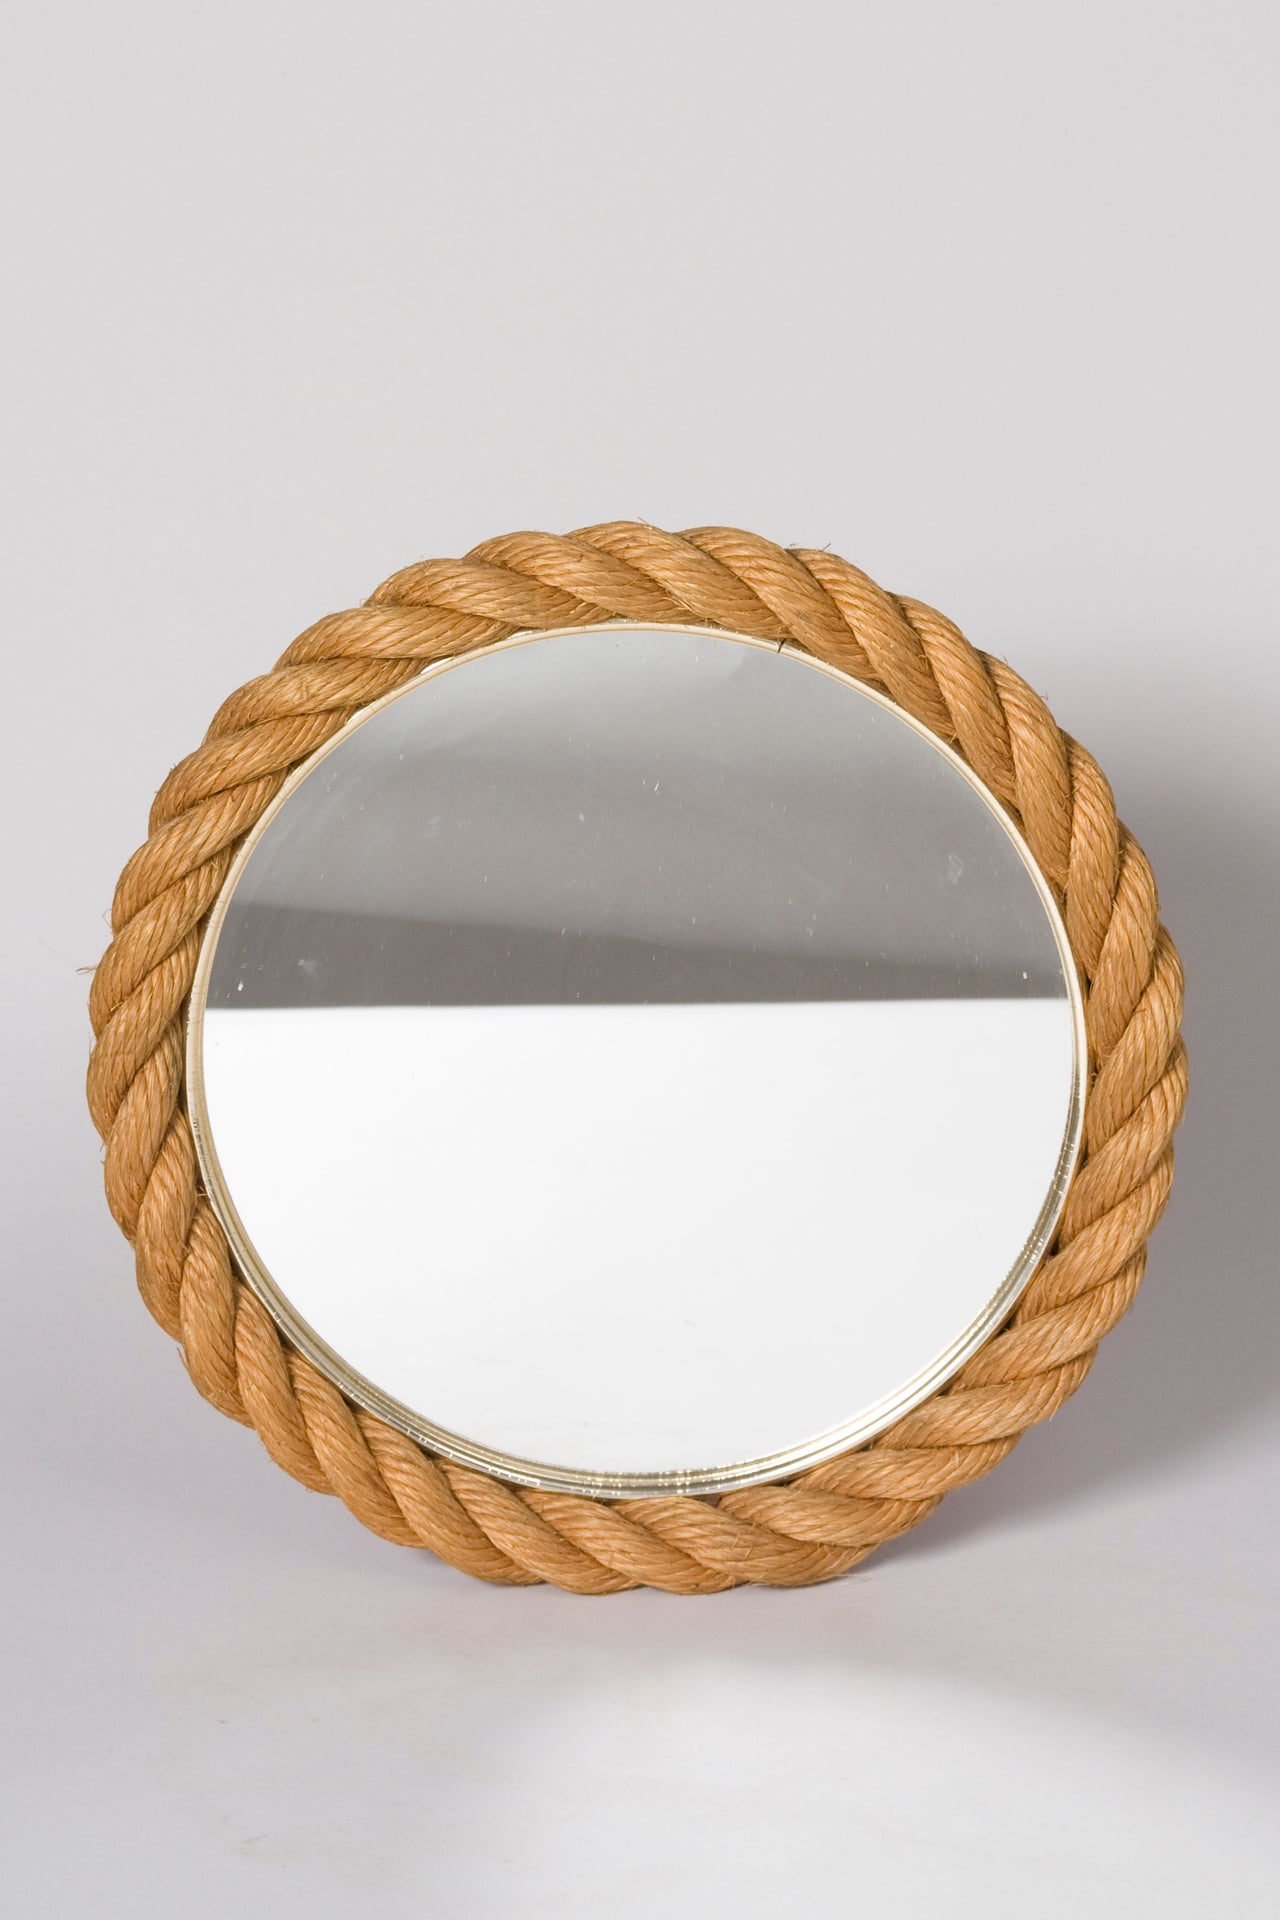 Braided Rope Frame Mirror by Audoux et Minet